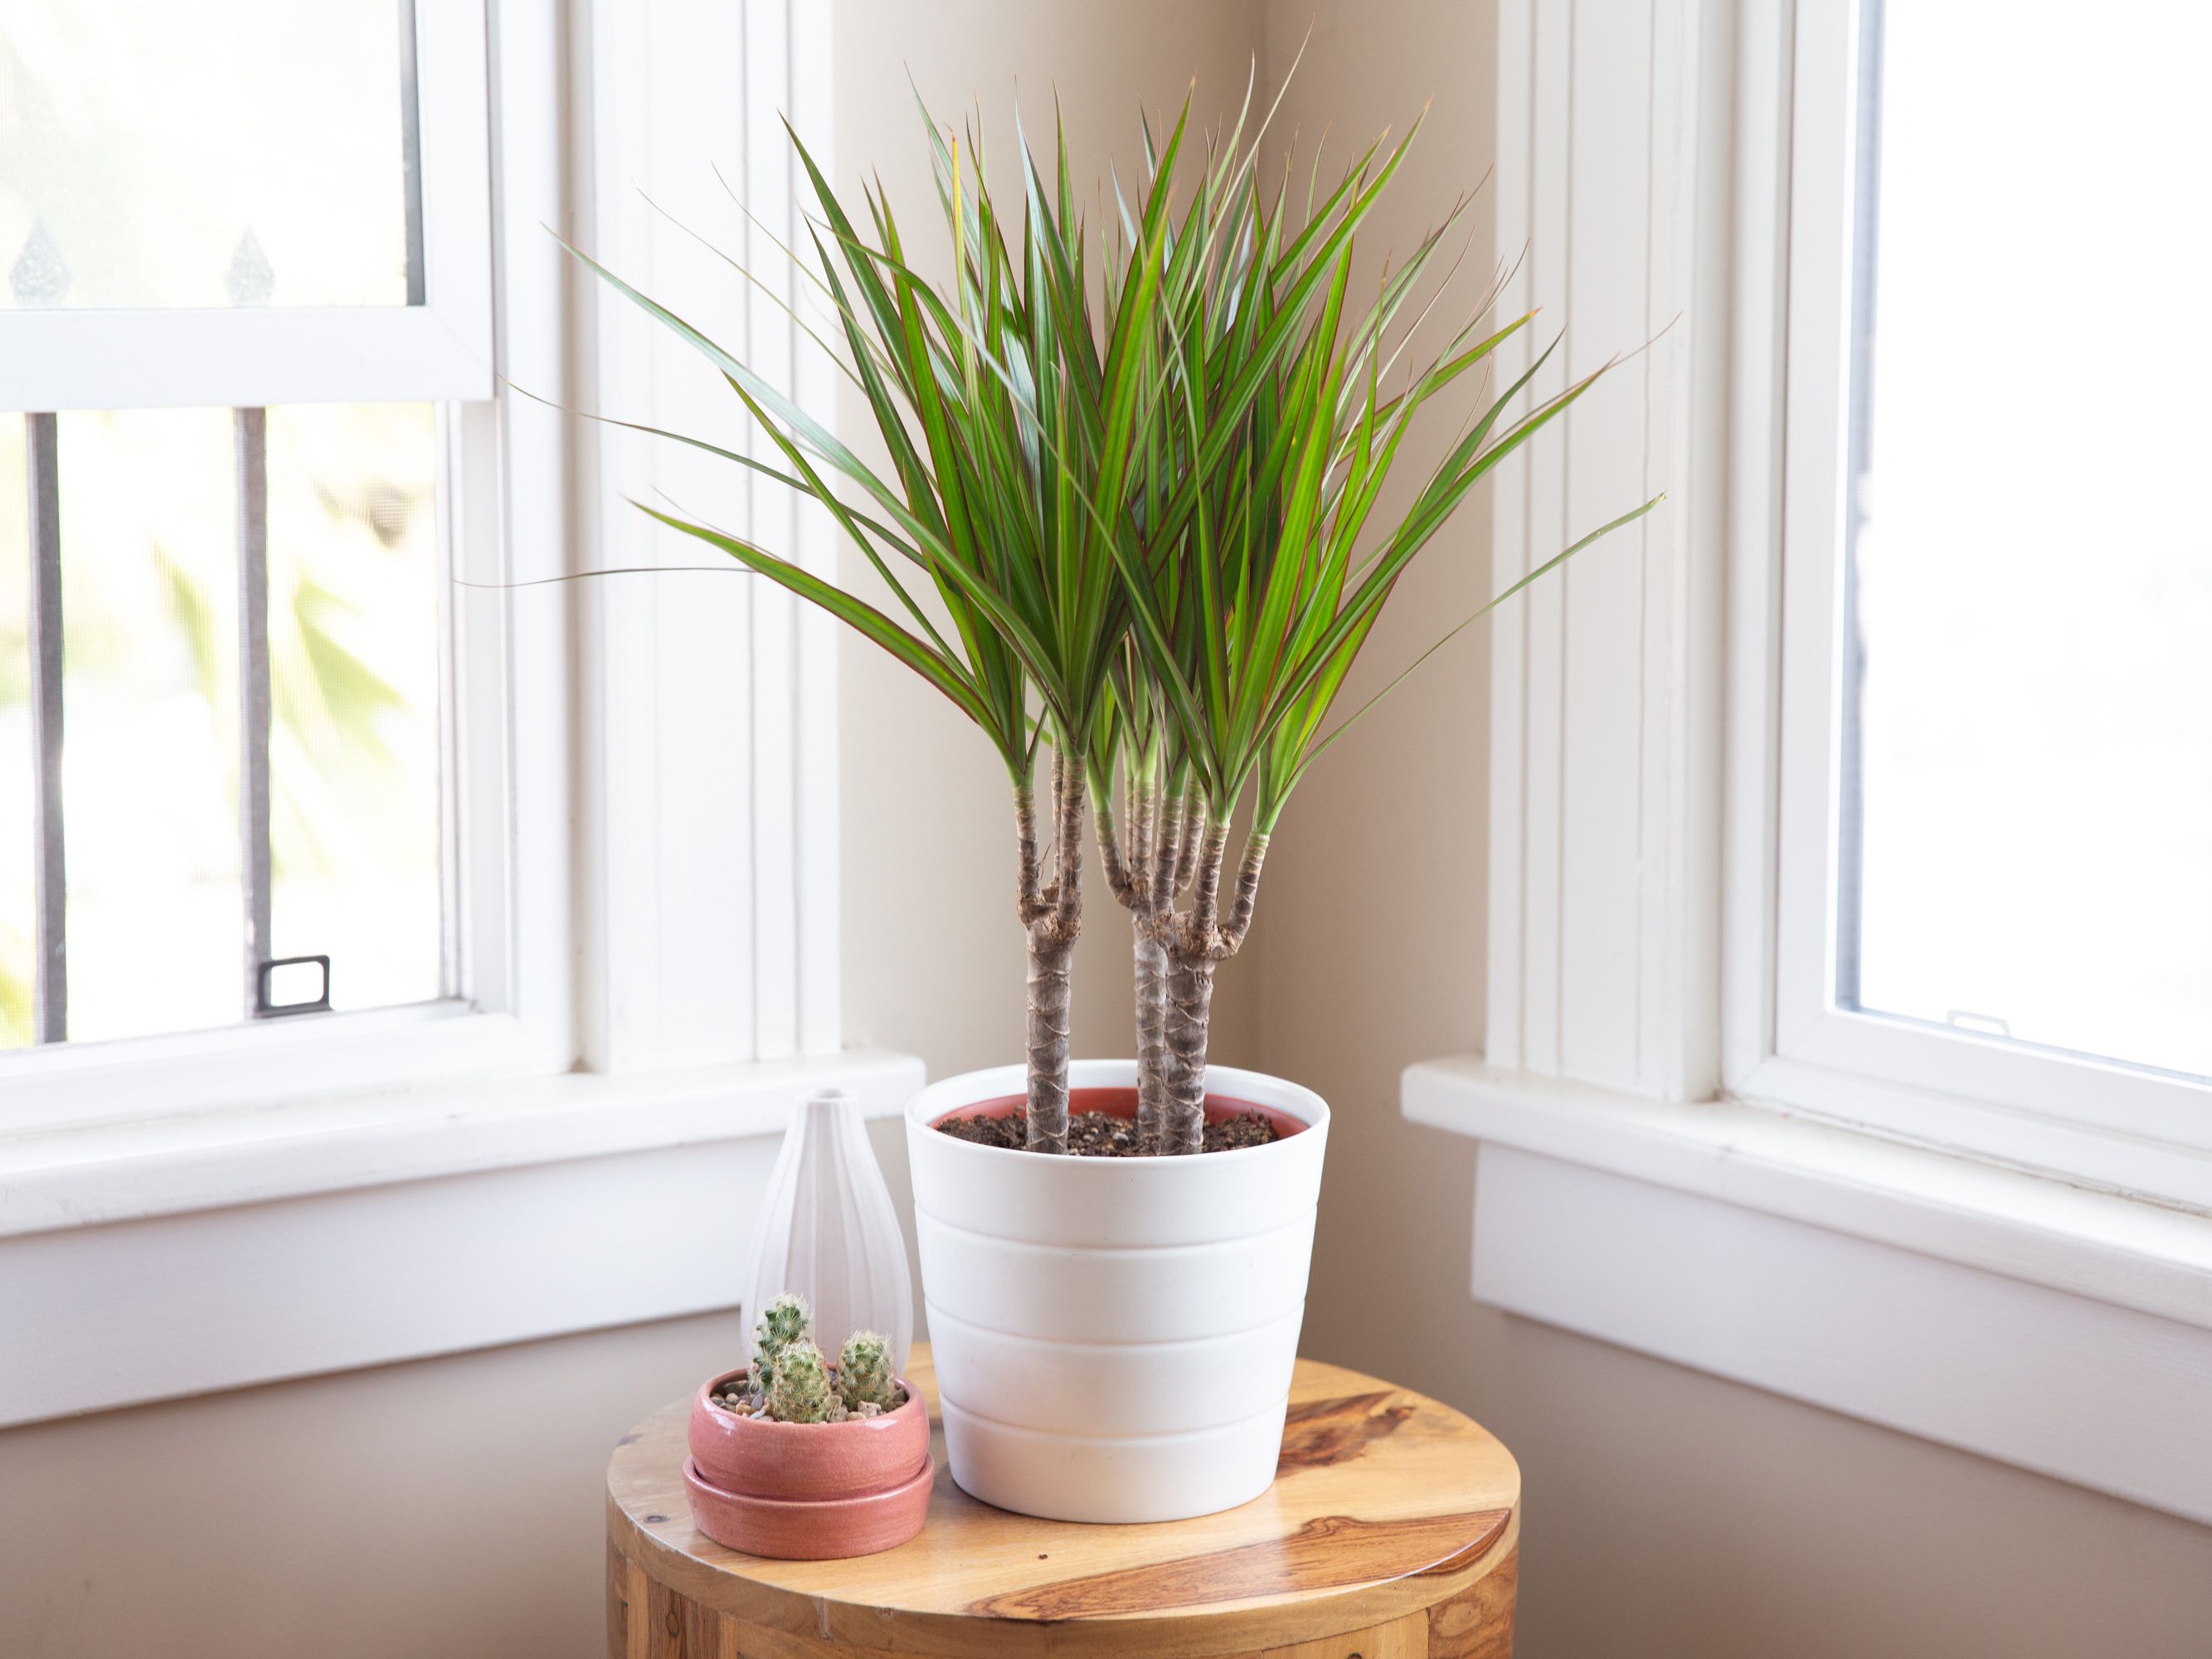 10 Houseplants That Generate Oxygen And Clear The Air In The Home - 67